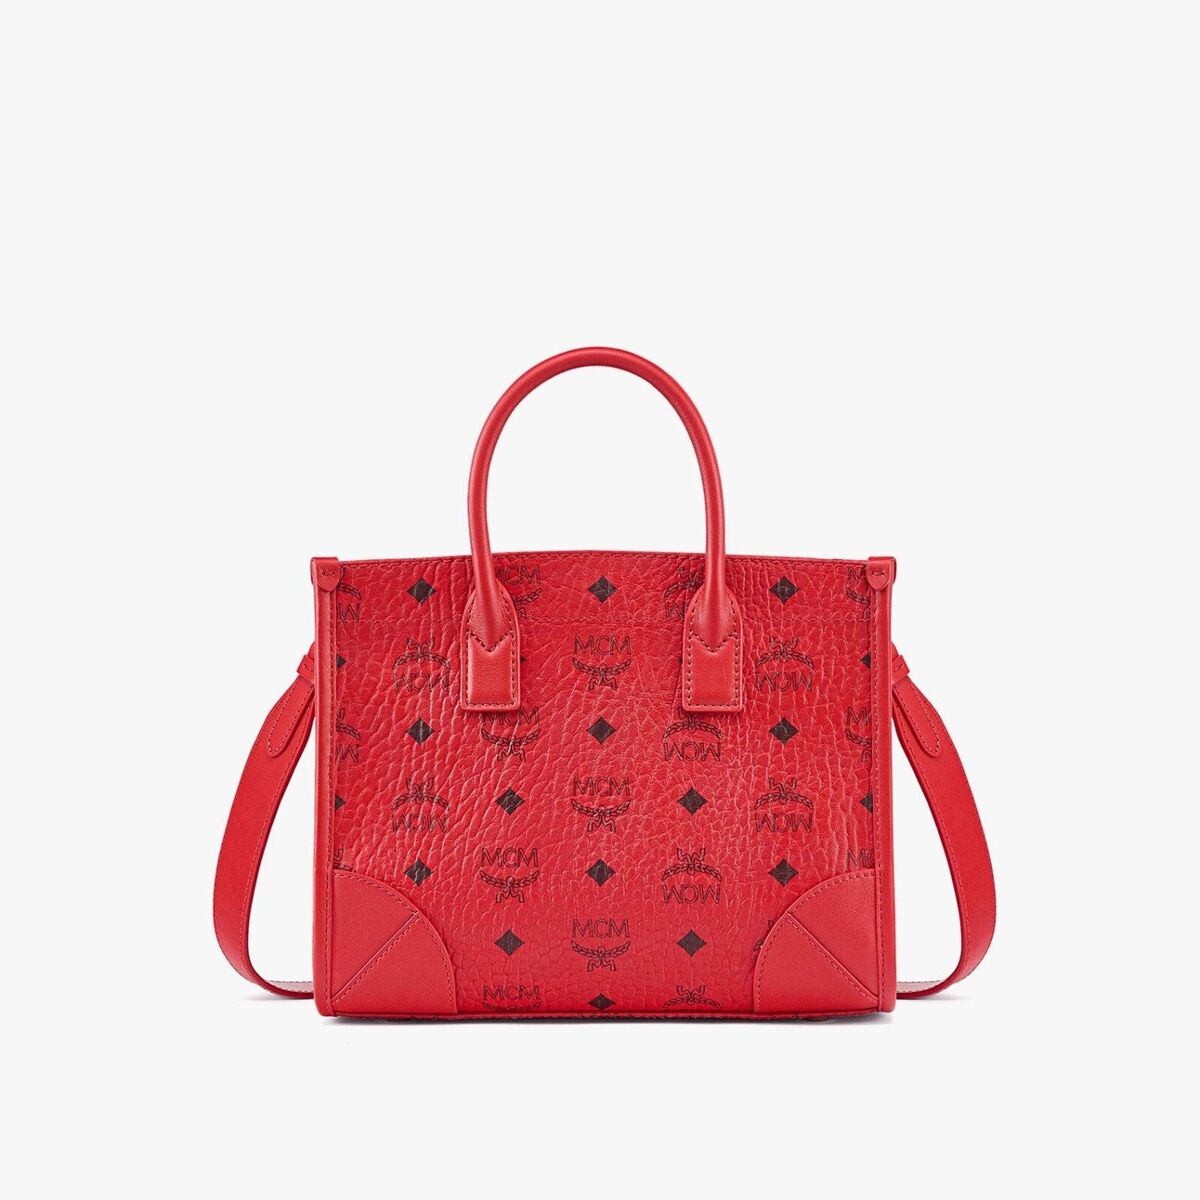 NEW Authentic MCM München Tote in Visetos / Candy Red